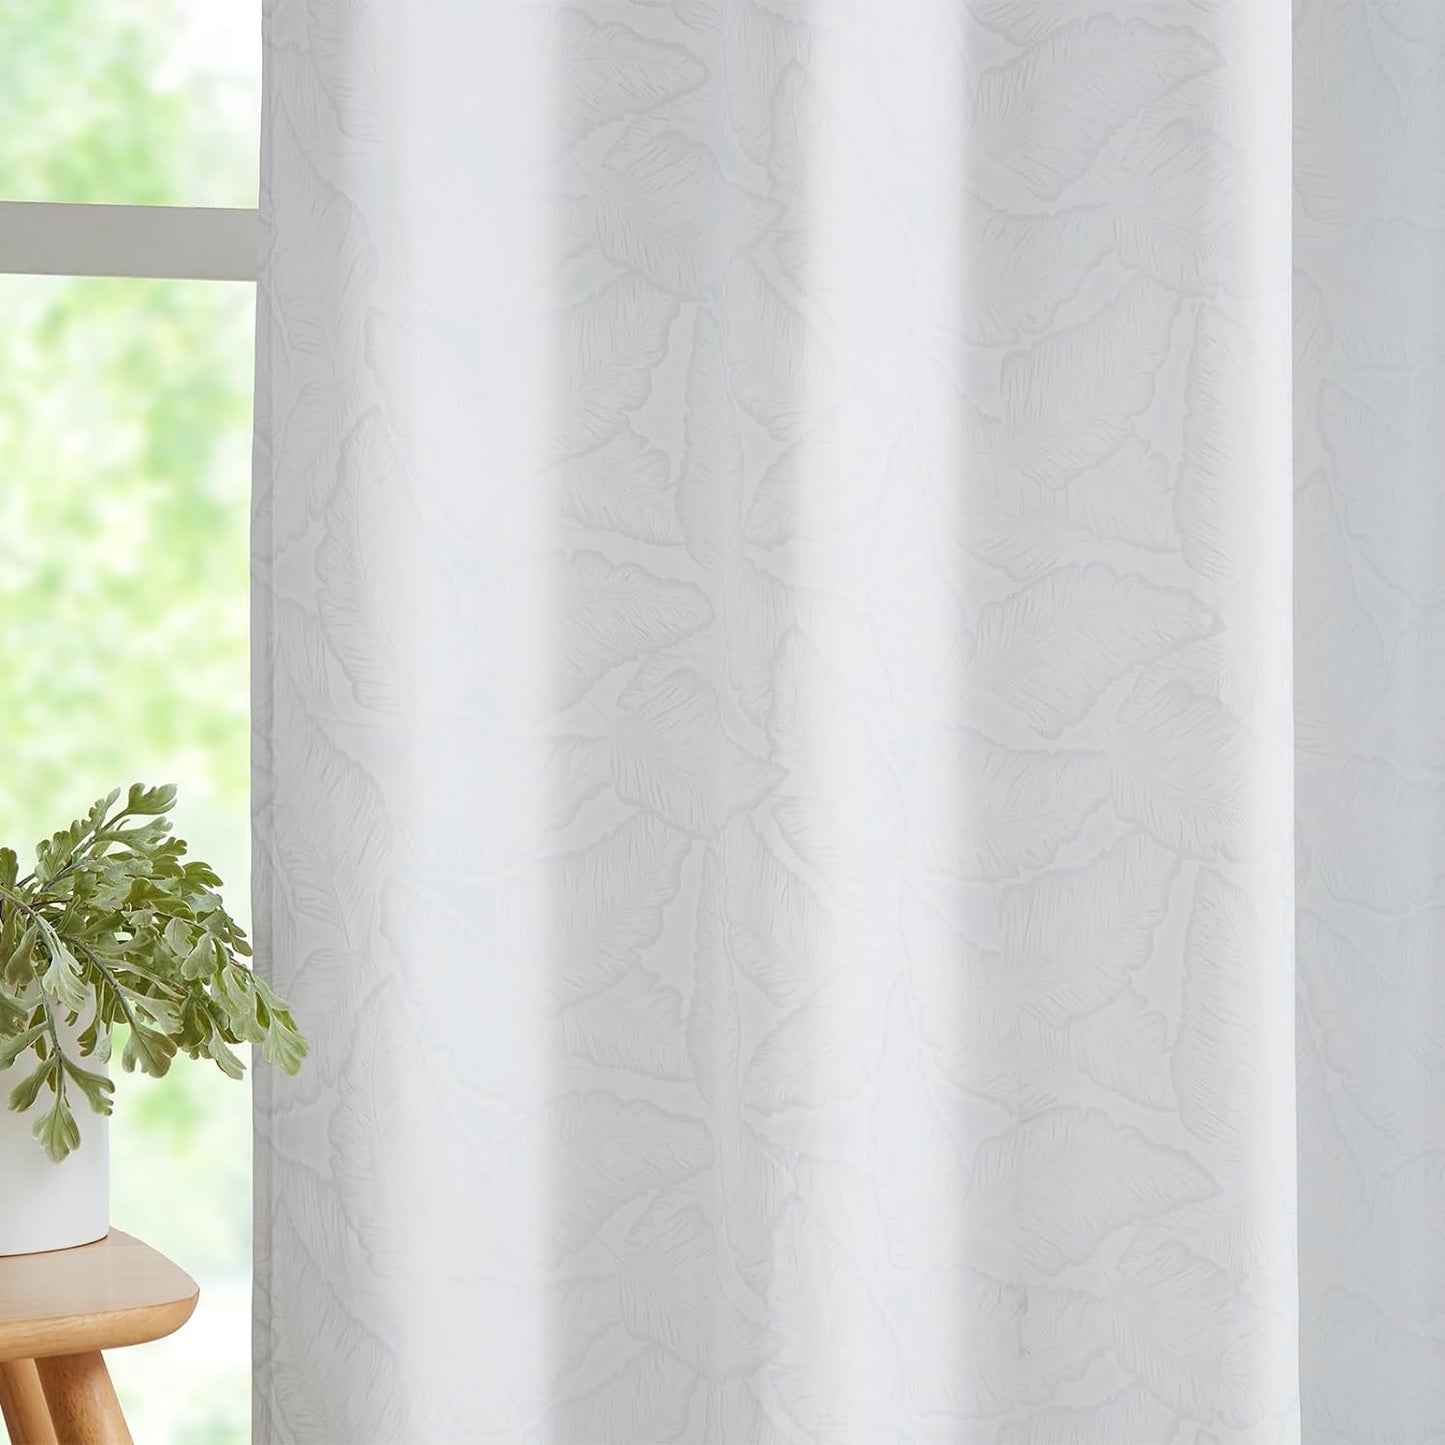 FMFUNCTEX Grey Semi-Sheer Curtains for Living Room Rich Linen Textured Rod Pocket Window Curtain Draperies for Guest Room Not See through 52”W X63”L Set of 2  Fmfunctex Leaf- Subtle Grey 52" X 96" 2Pcs 